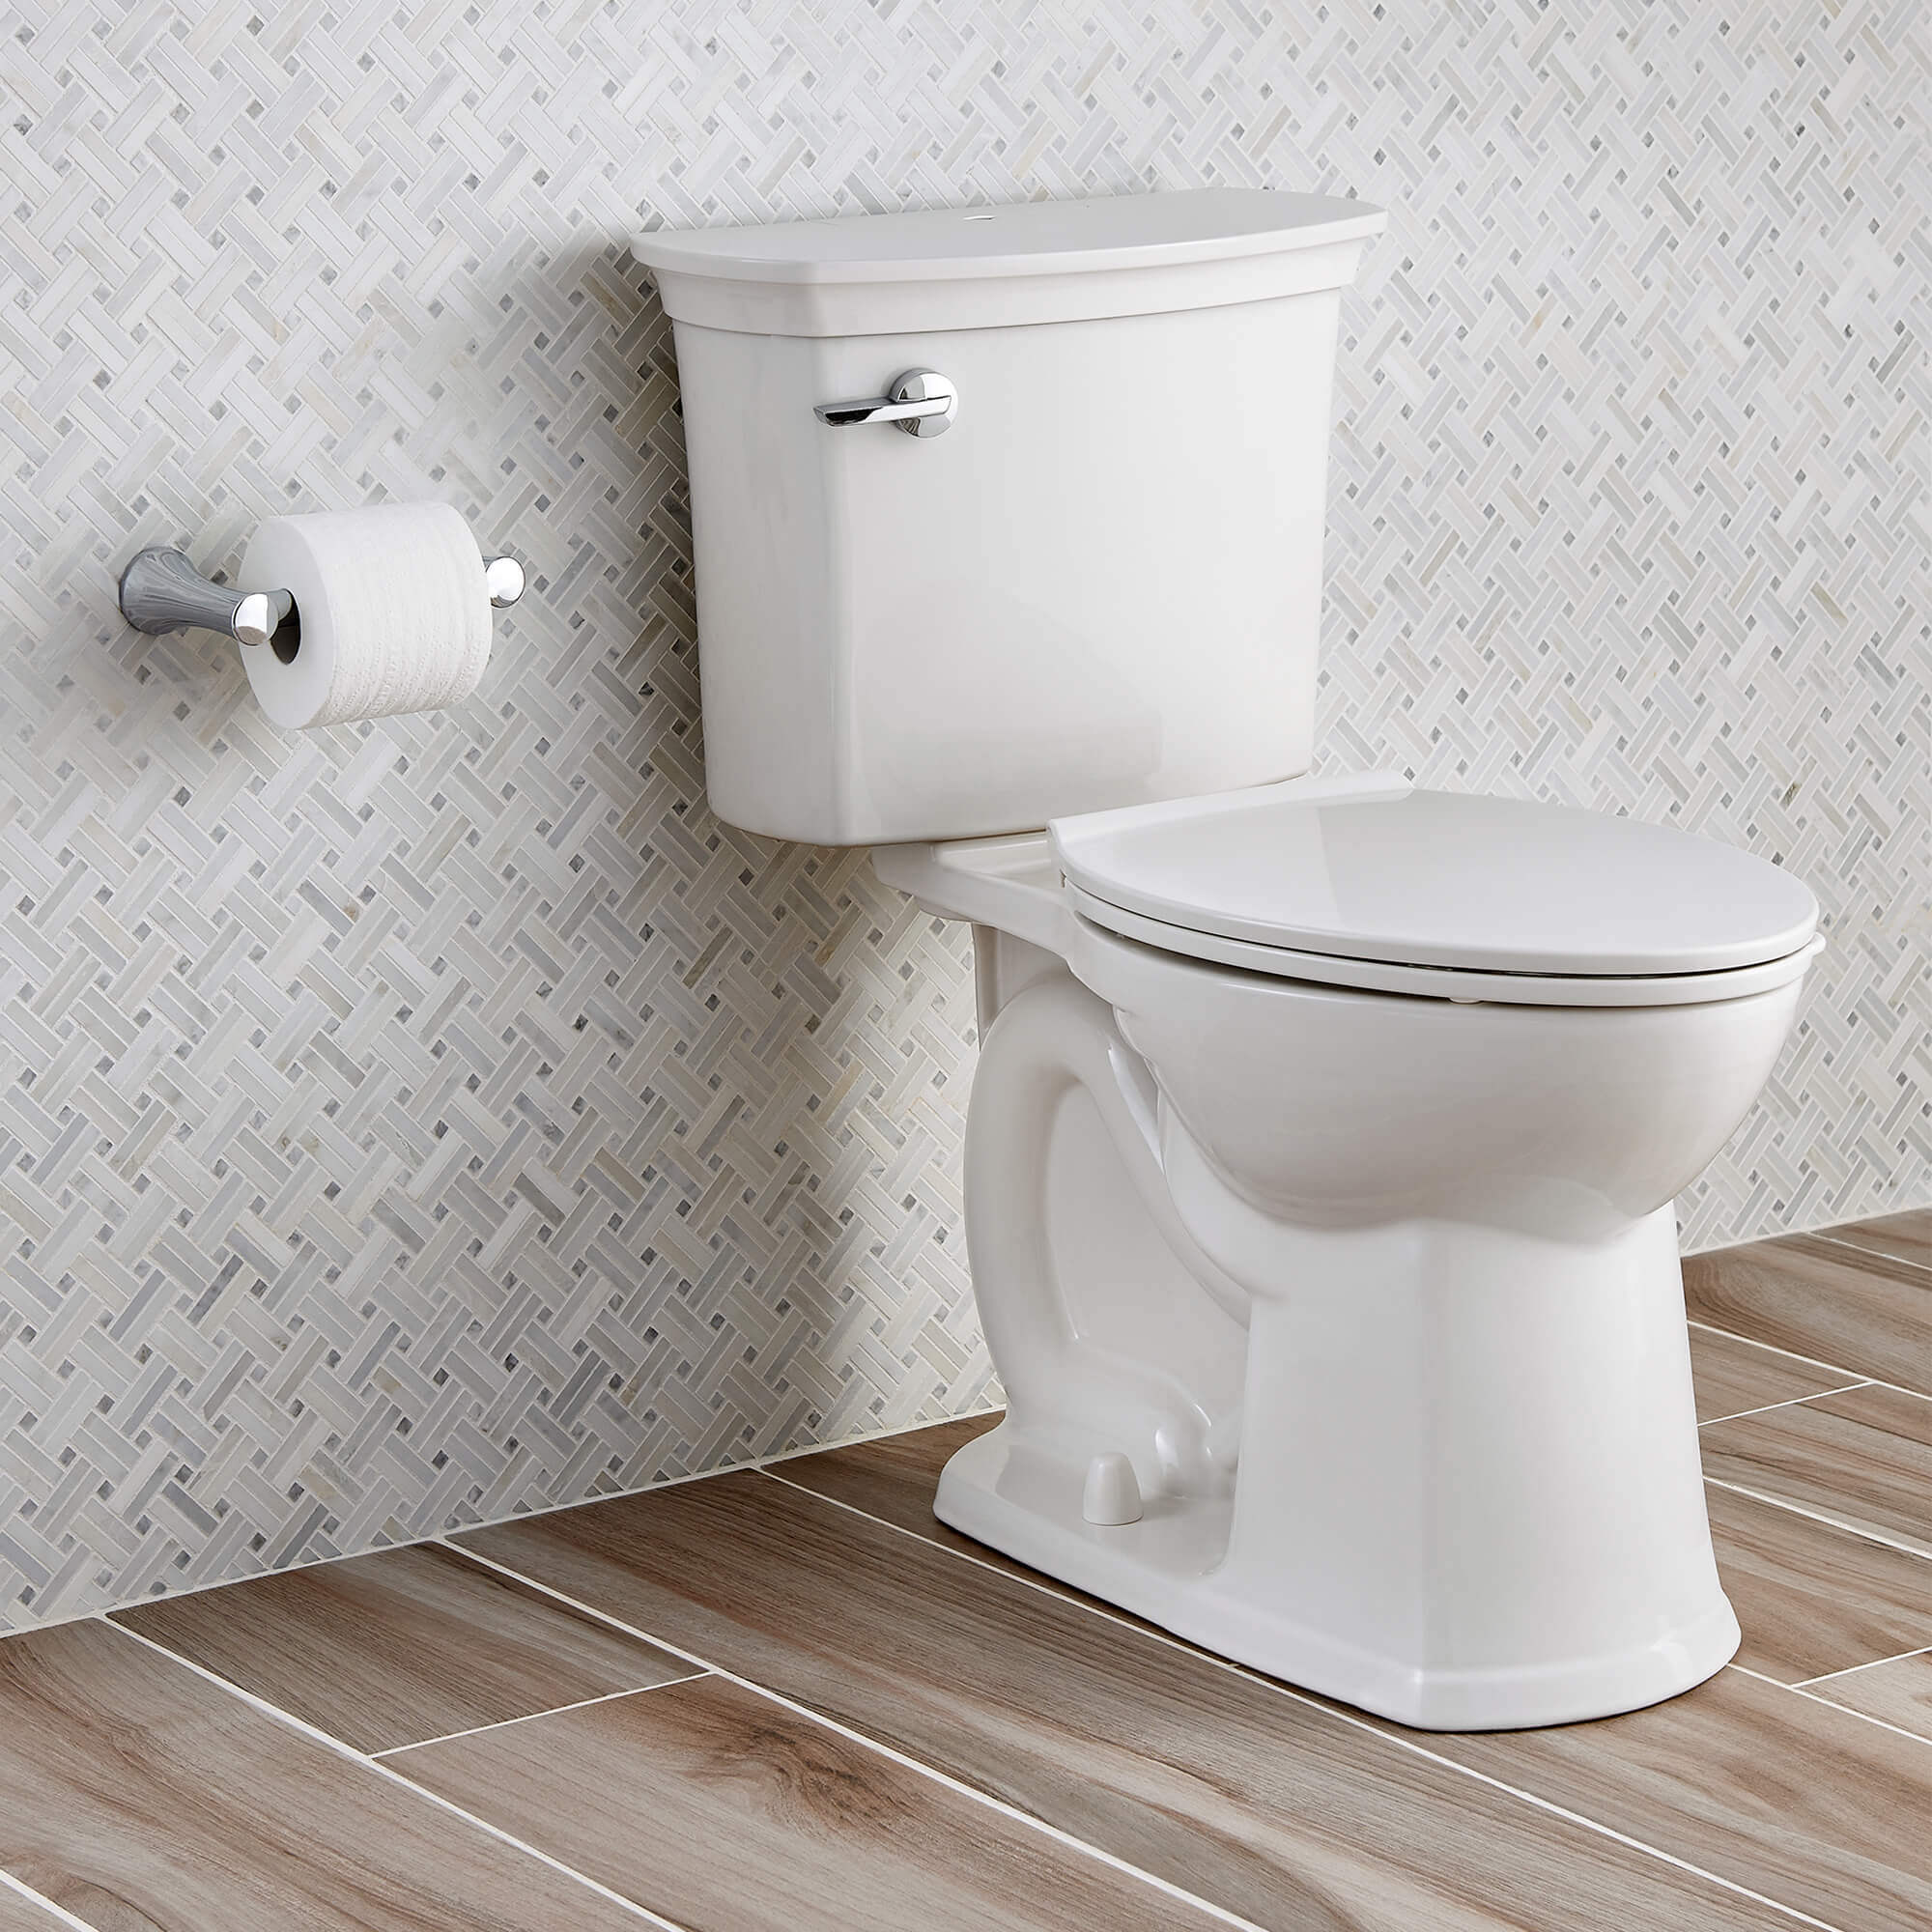 How To Install American Standard Toilet